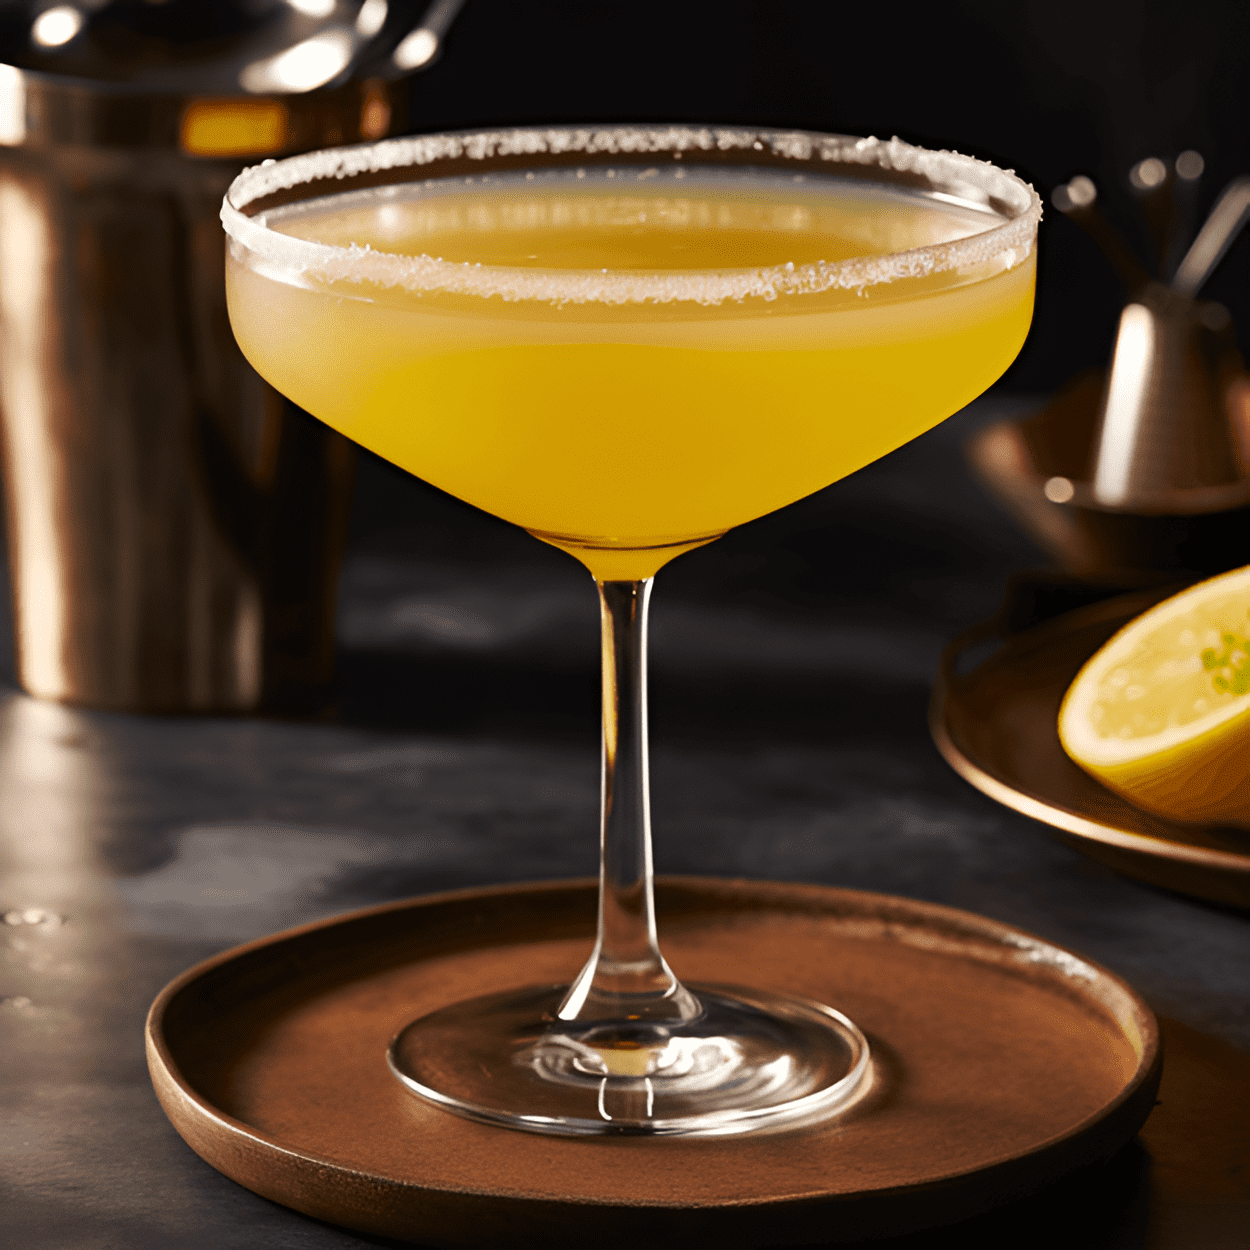 Henny Hustle Cocktail Recipe - The Henny Hustle is a harmonious blend of strong, smooth, and sweet. The cognac lends a rich, full-bodied flavor, while the lemon juice adds a refreshing citrus twist. The honey syrup brings a subtle sweetness that ties everything together, making for a well-rounded, satisfying cocktail.